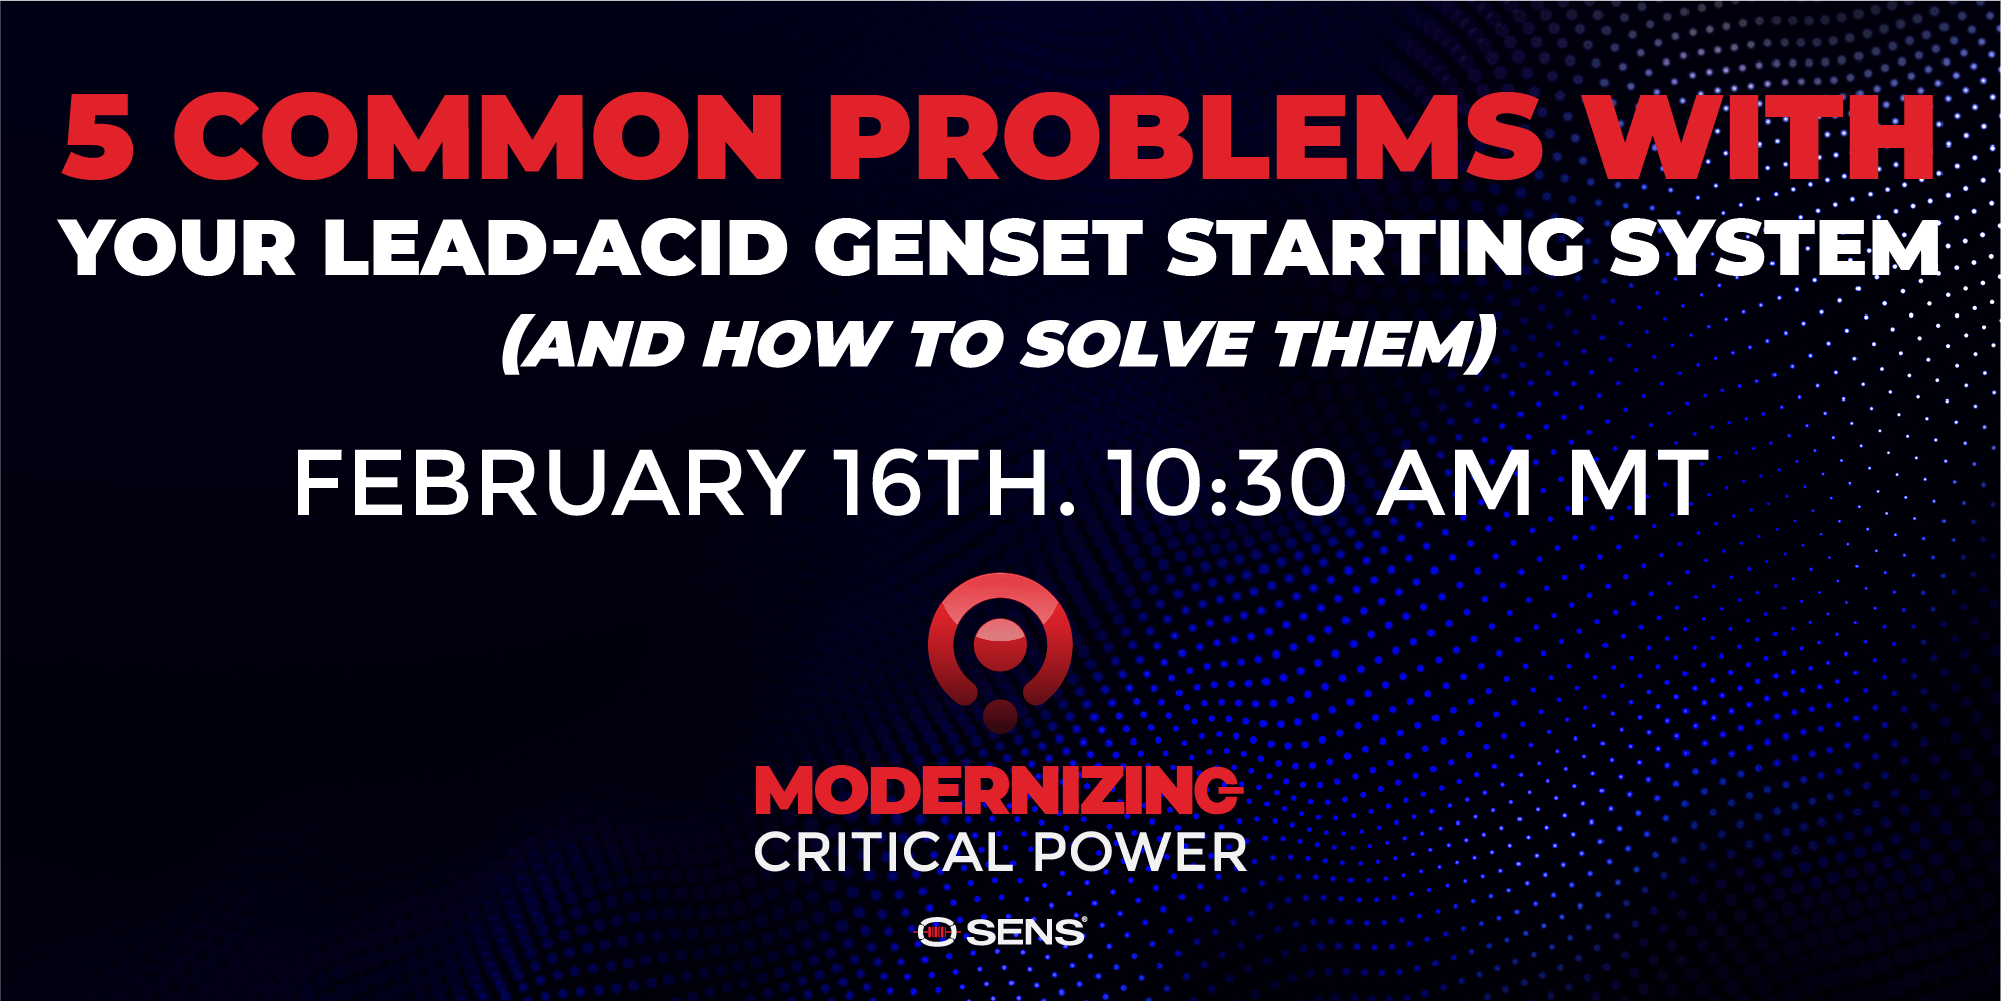 Modernizing Critical Power Live - 5 Common problems with your lead-acid genset starting system (and how to solve them)